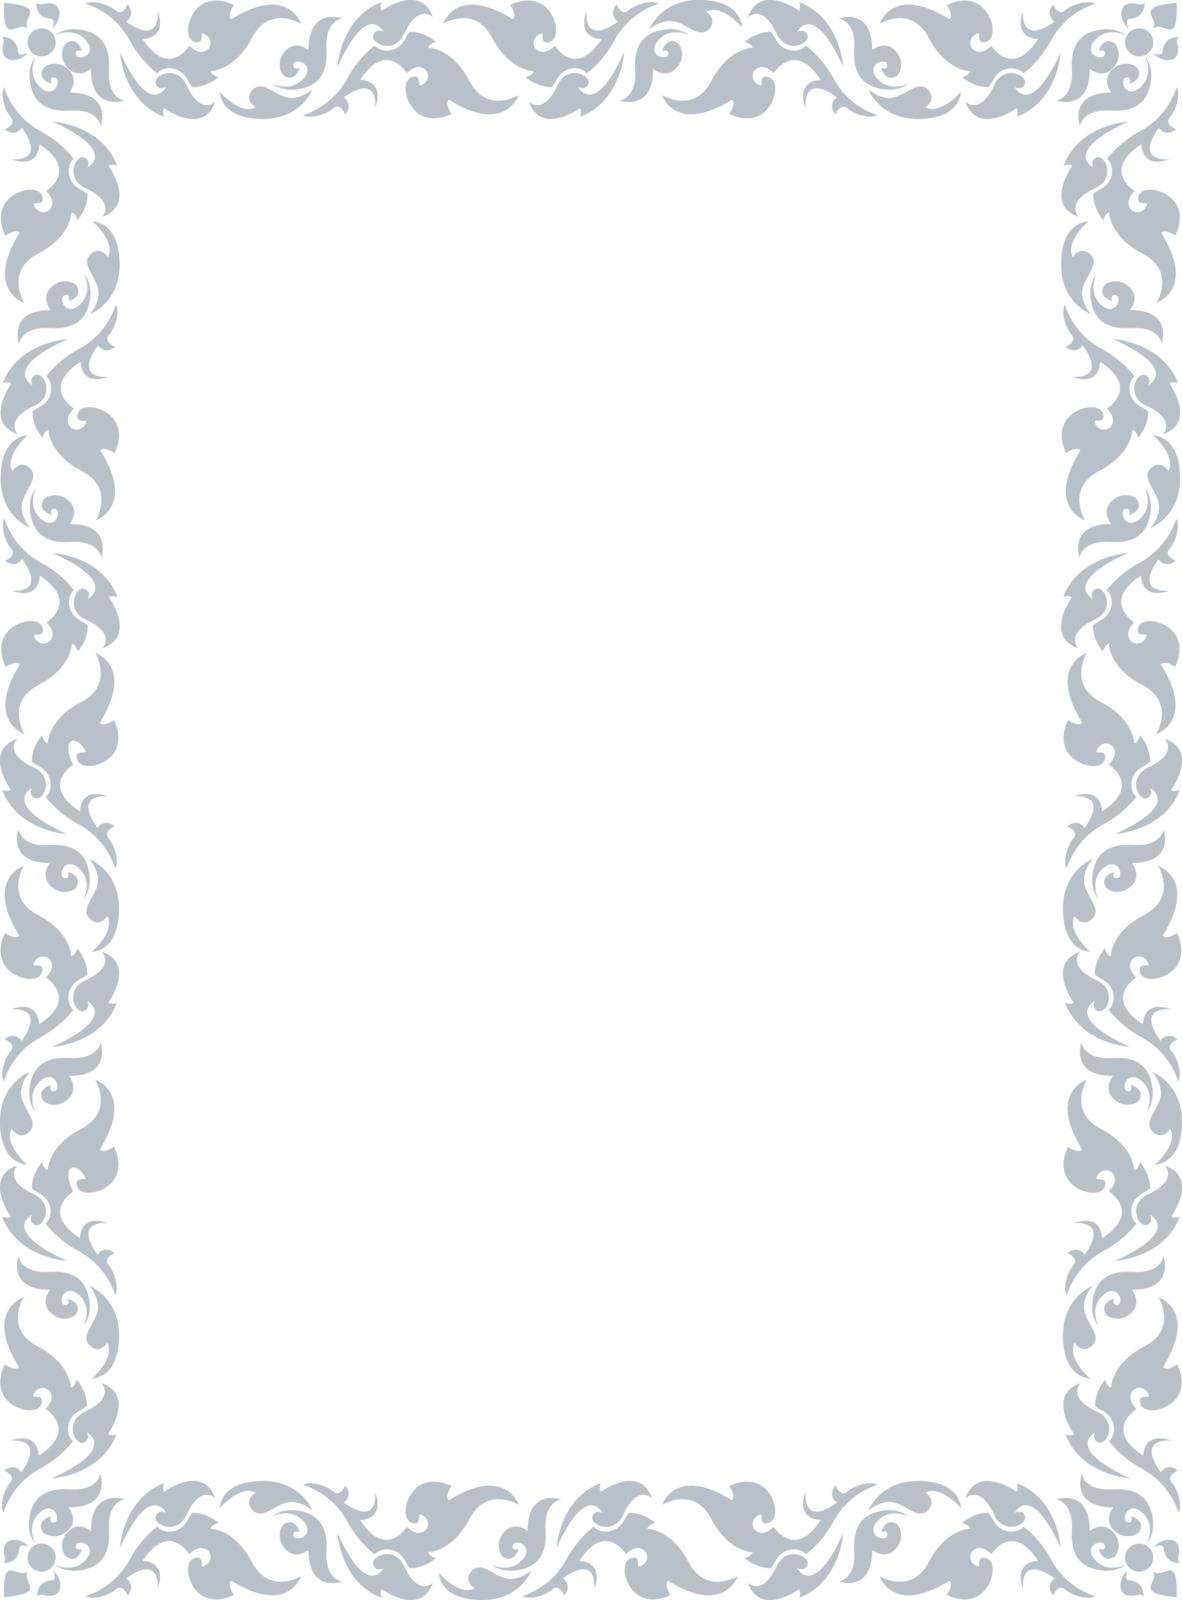 thai pattern frame for backdrop and border background, vector